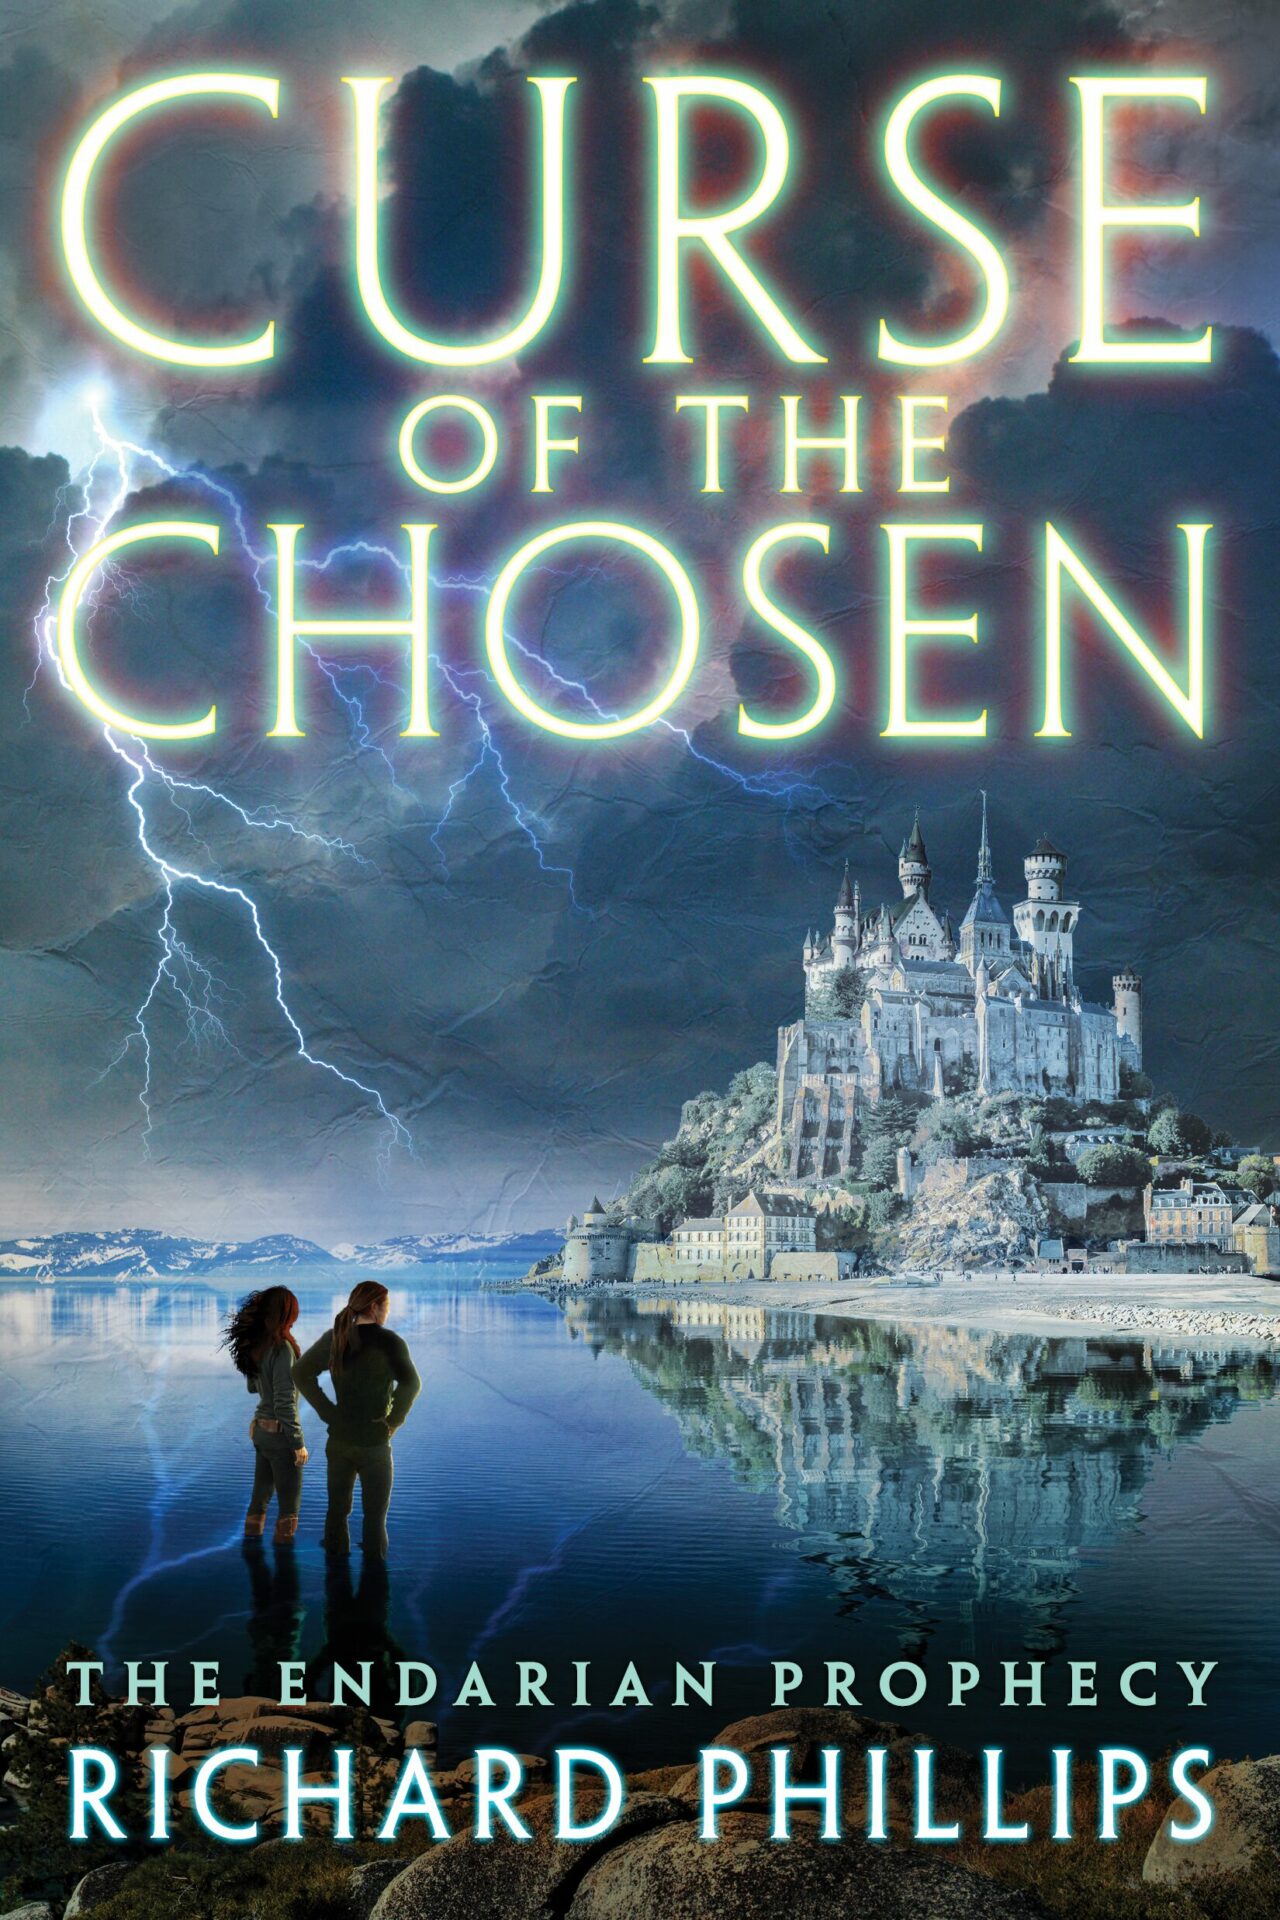 Curse of the Chosen by Richard Phillips